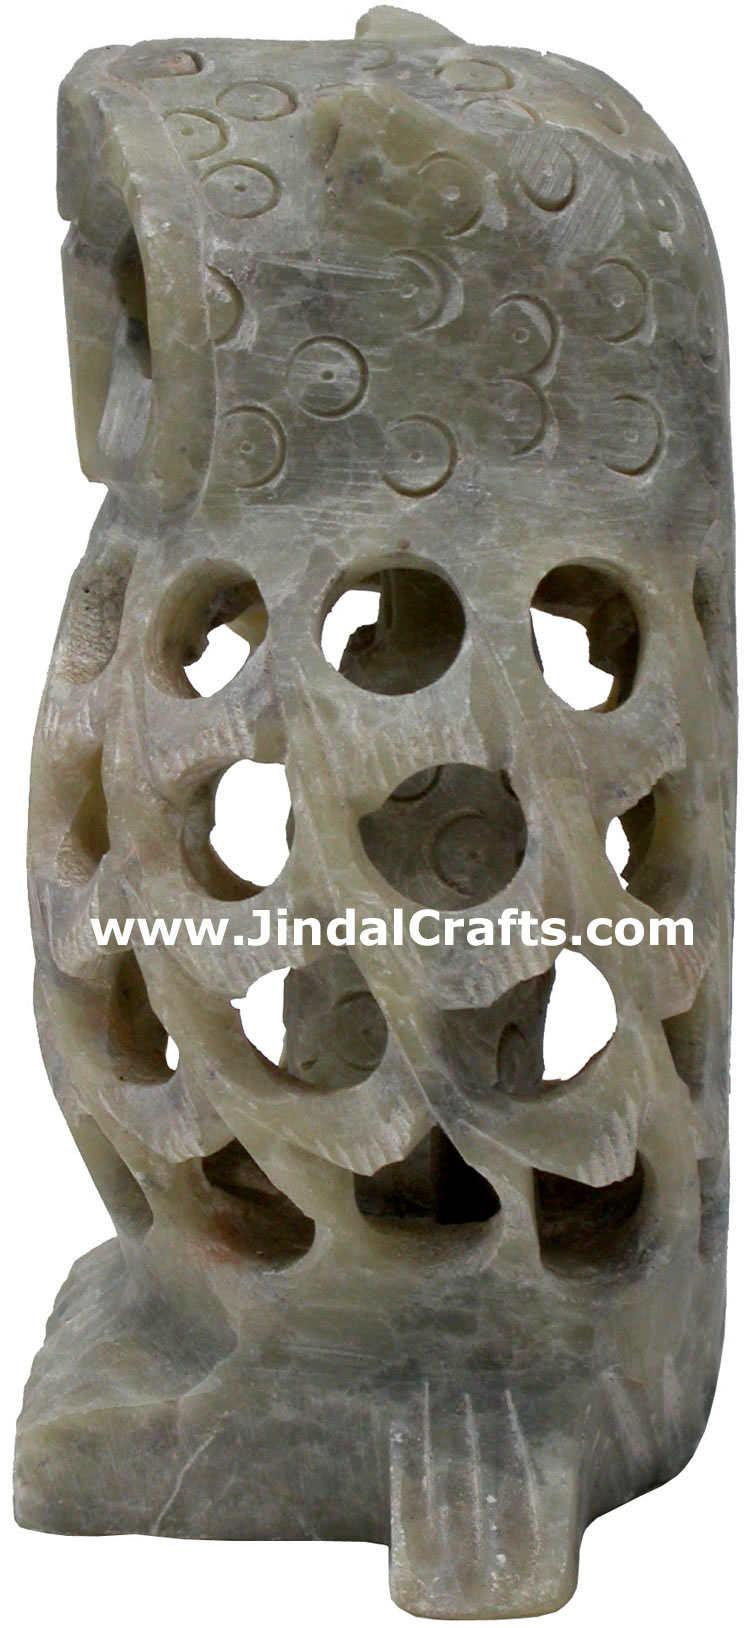 Baby Owl - Hand Carved Soft Stone Birds Figures India